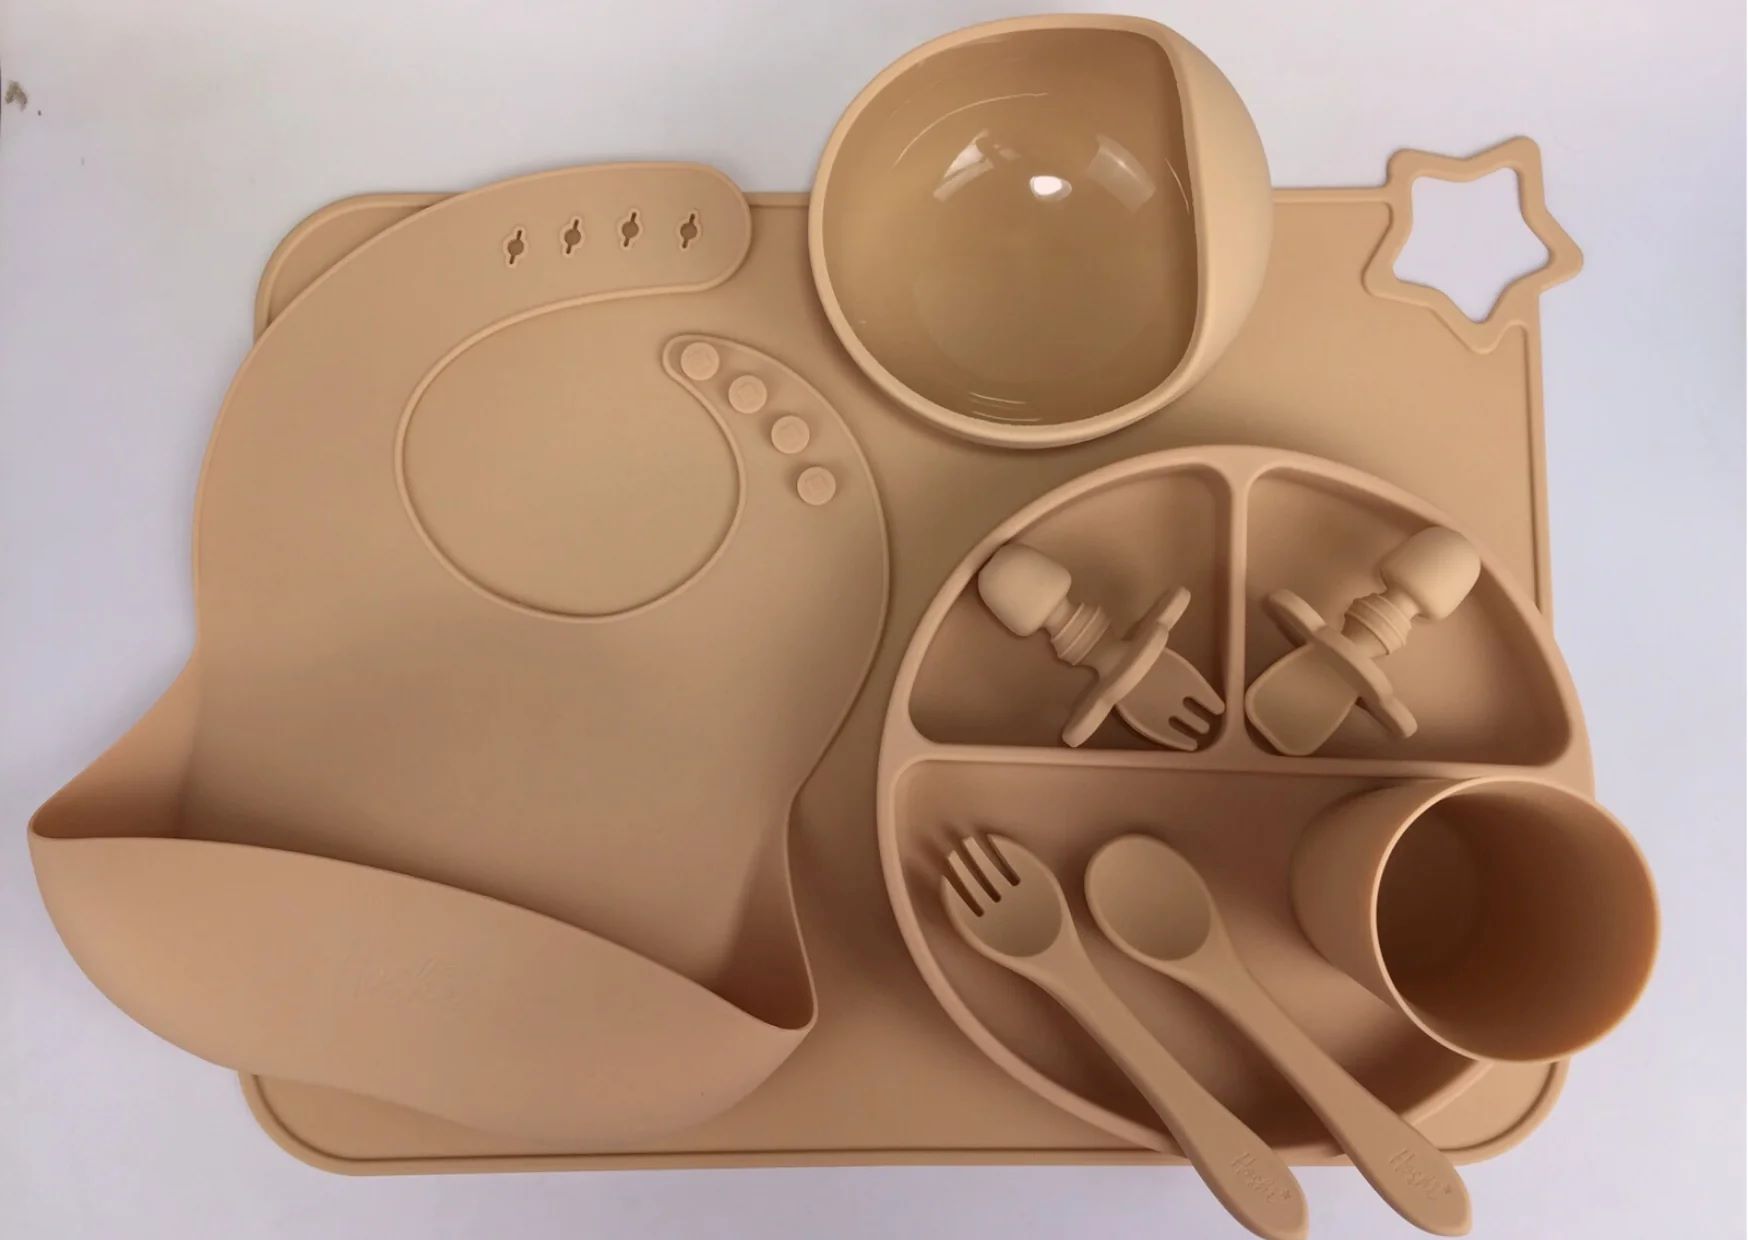 Baby Feeding Set Review: The Best Options for Your Little One